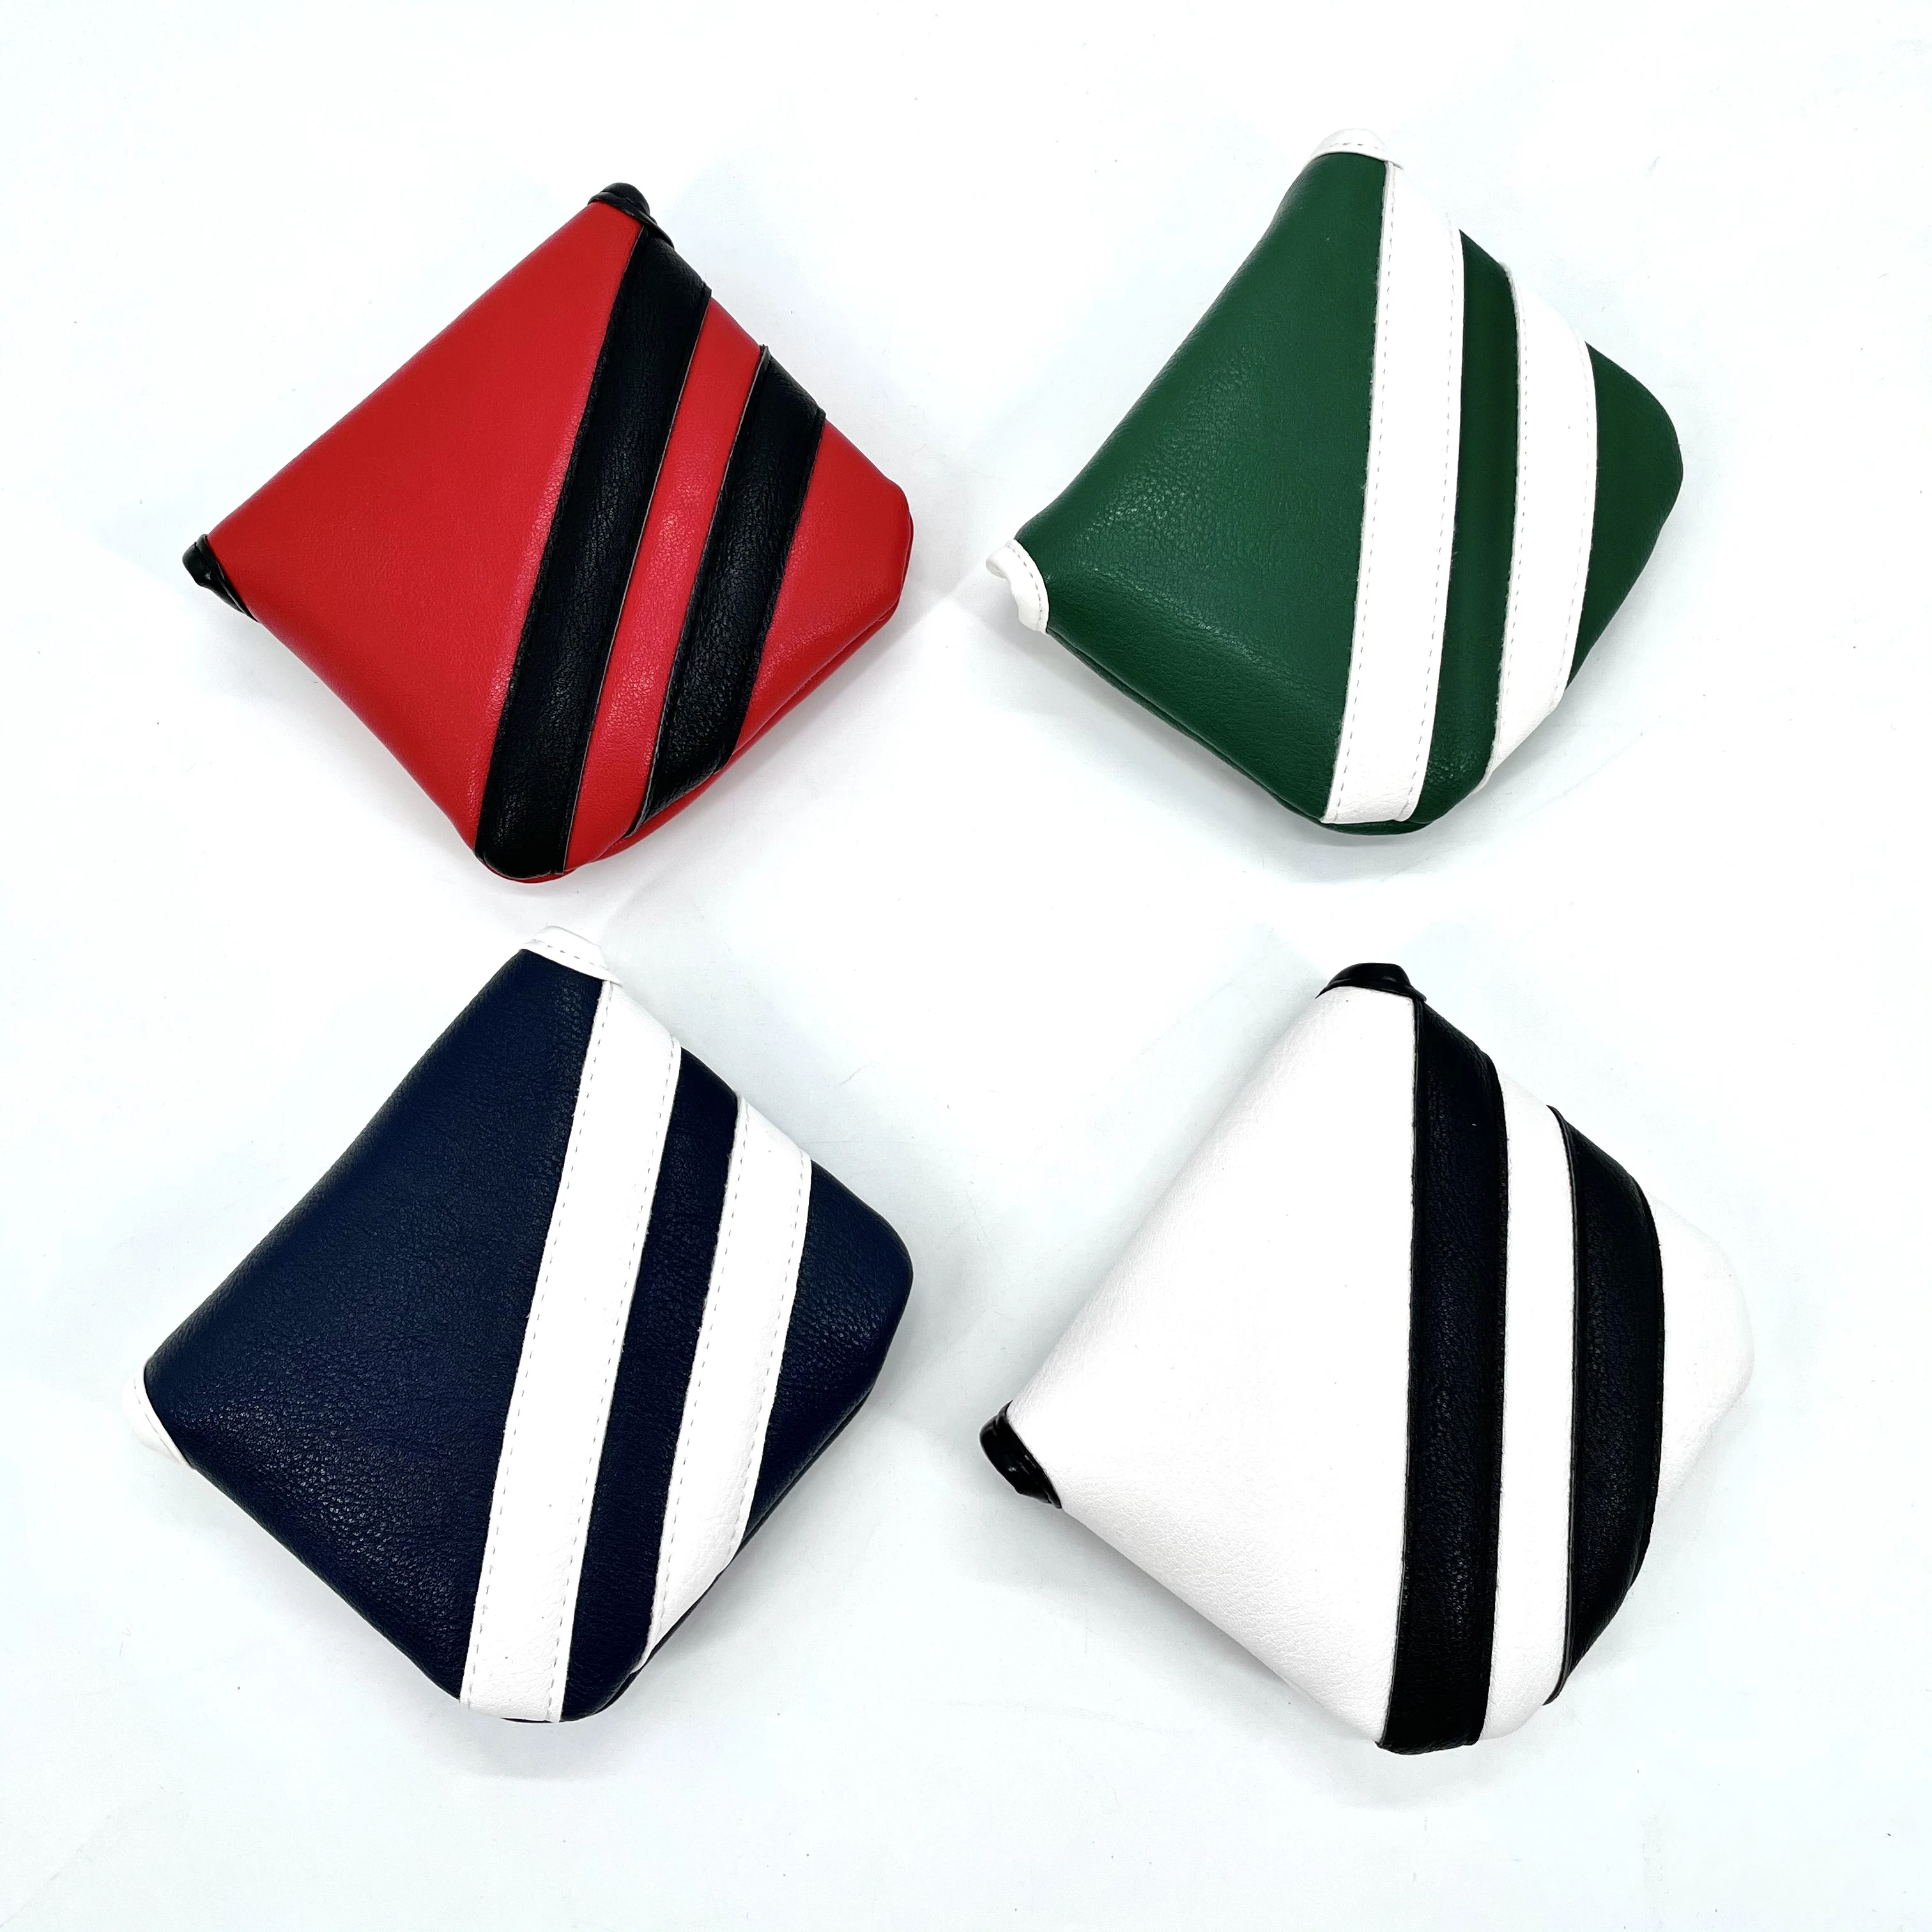 Golf stripe Putter Cover Classics Design Leather Golf Square Mallet Putter Headcovers Golf Club Head Cover PU Leather .